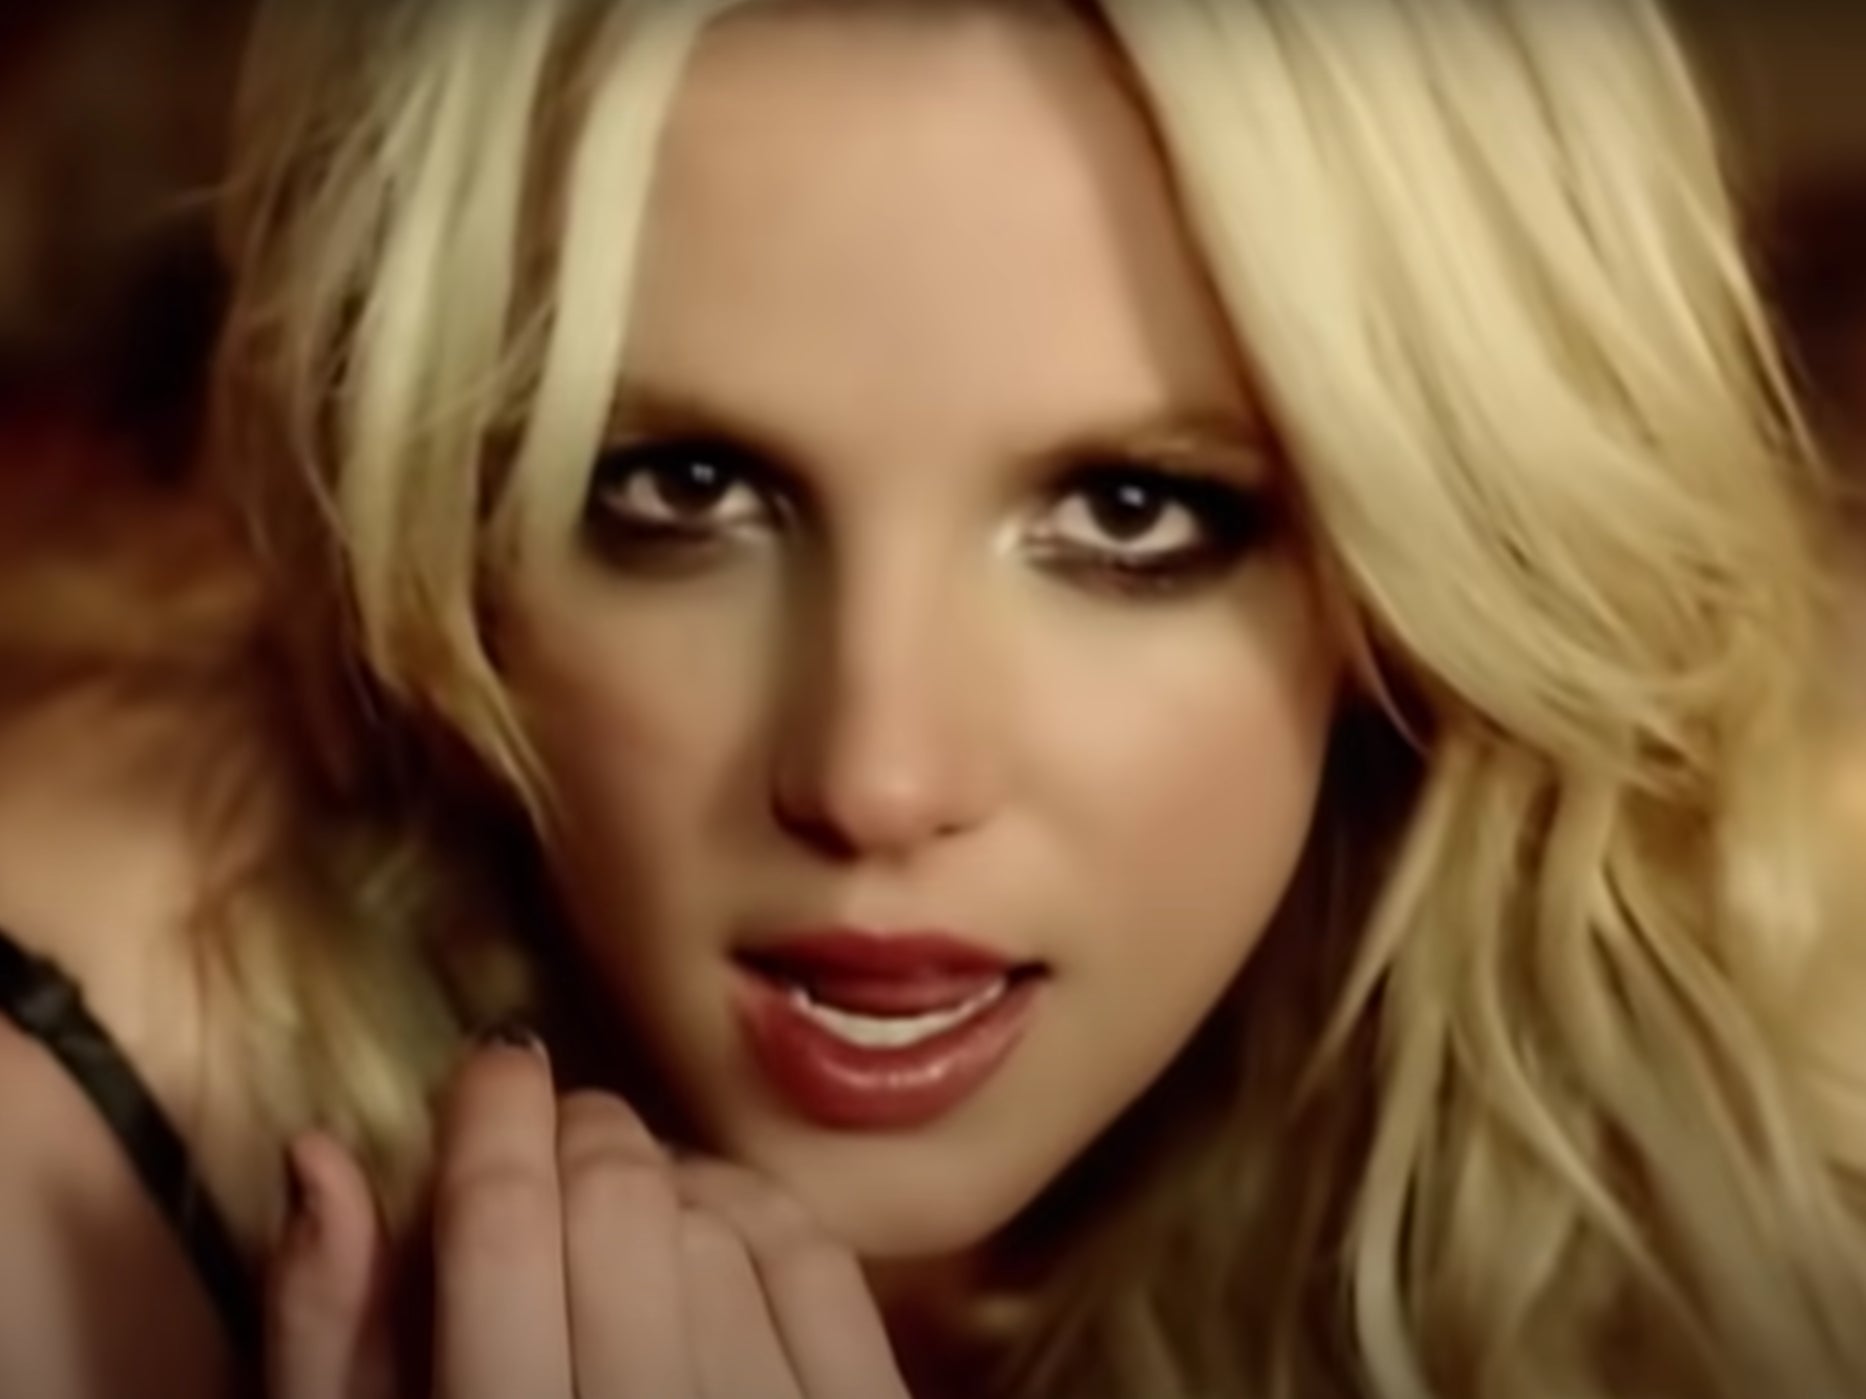 From Britney Spears to Nina Simone The 10 most outrageous sexual innuendos in music The Independent